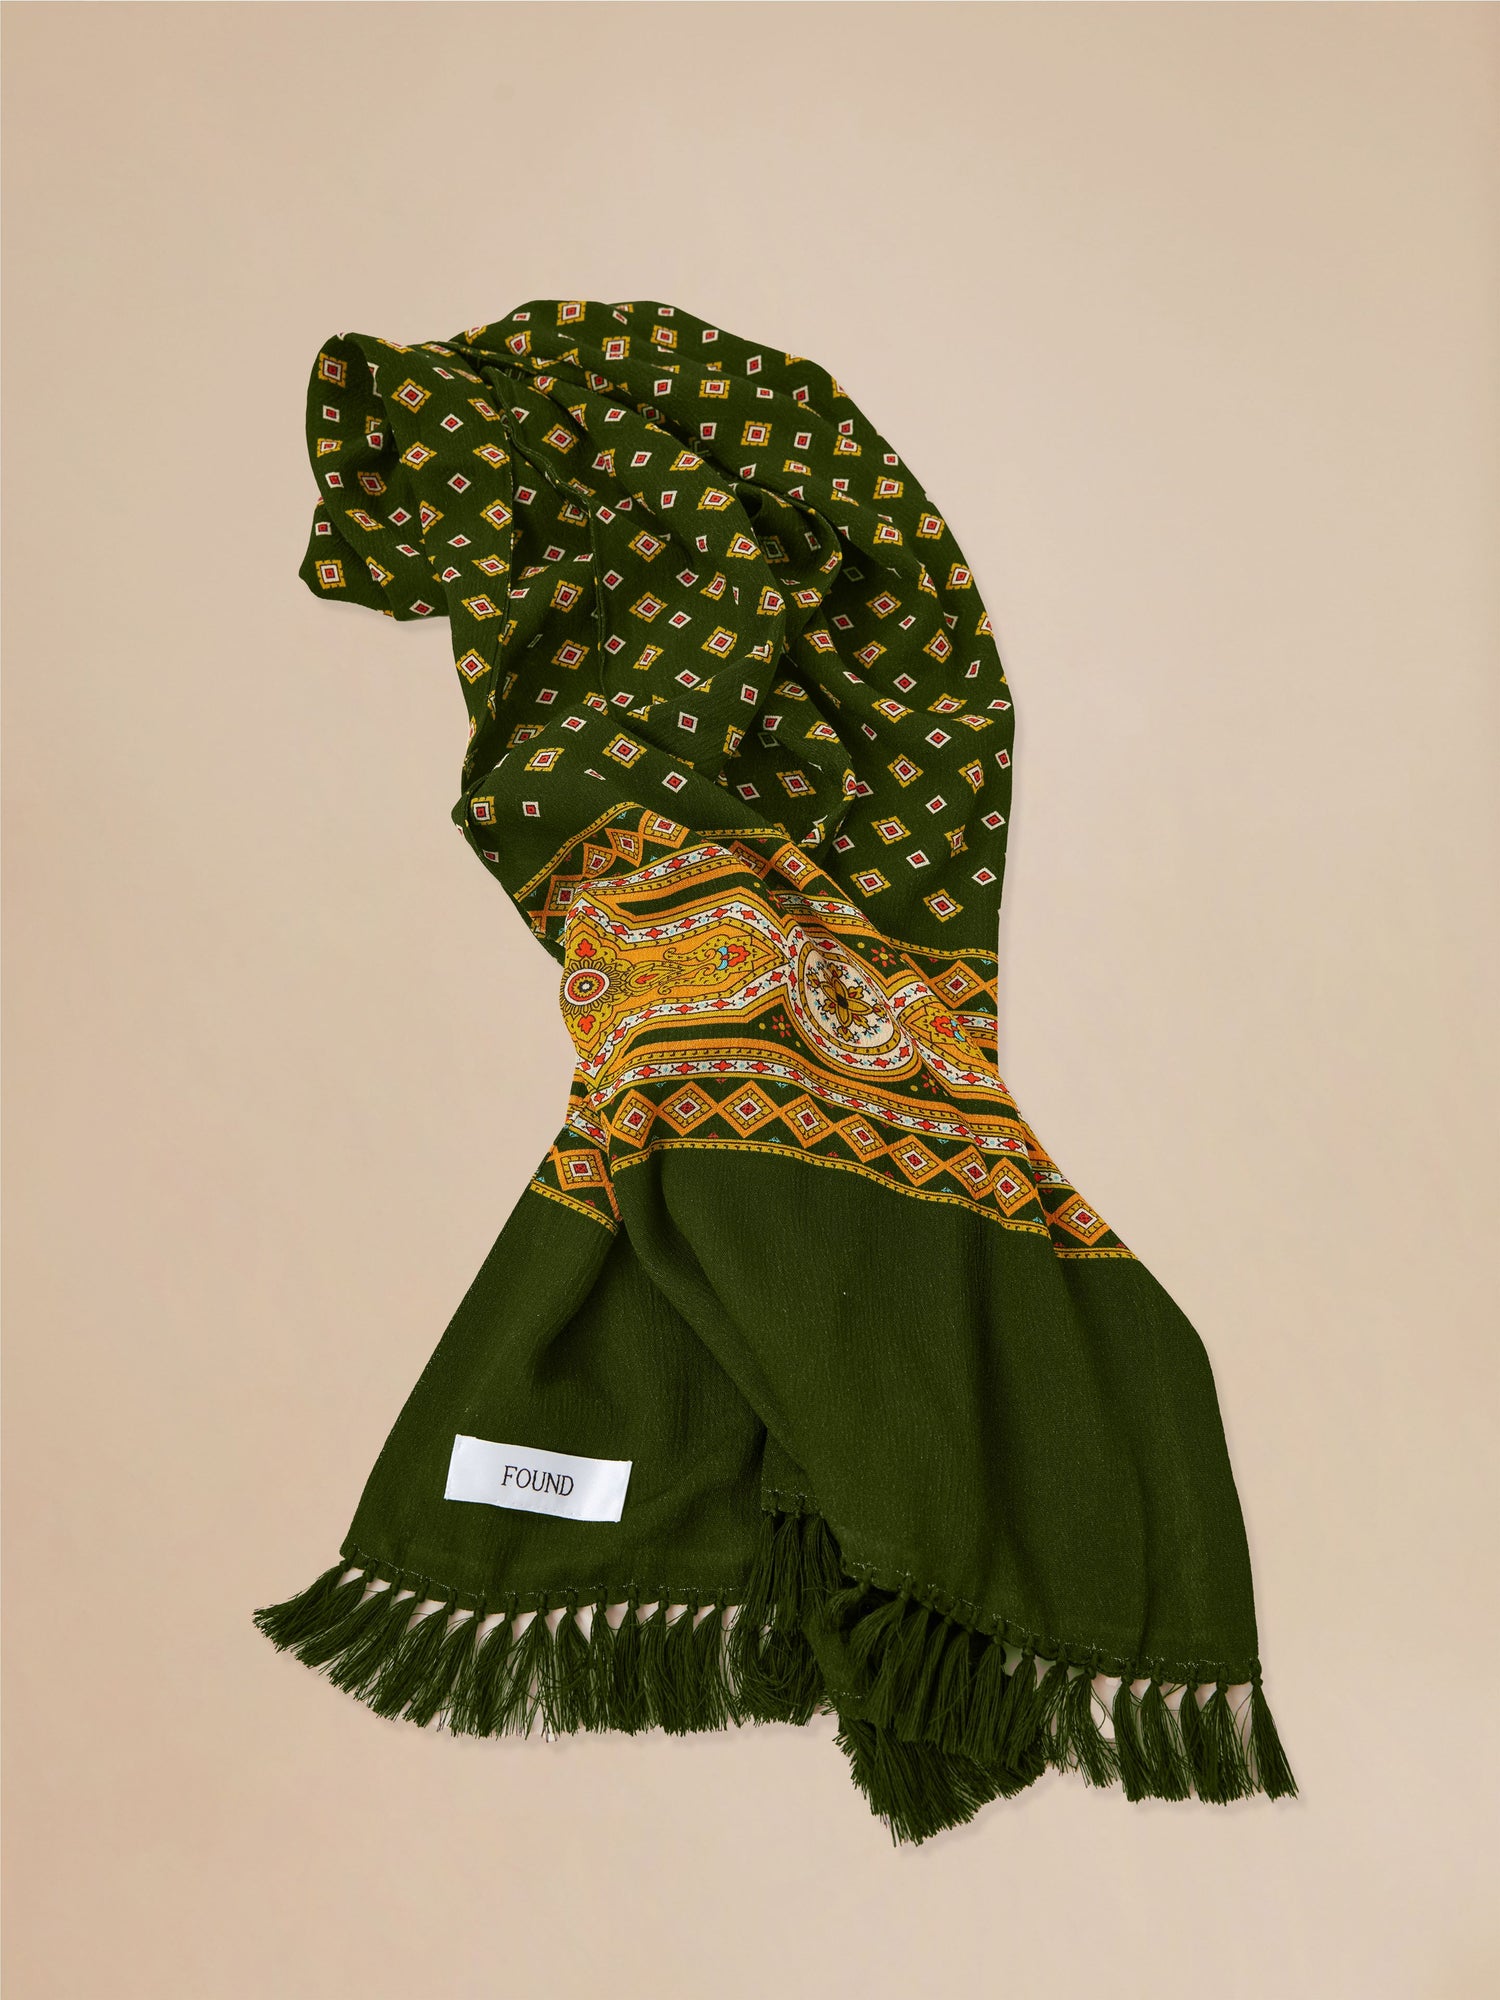 Embroidered cashmere scarf in forest green | Found - Greener Pastures Scarf.